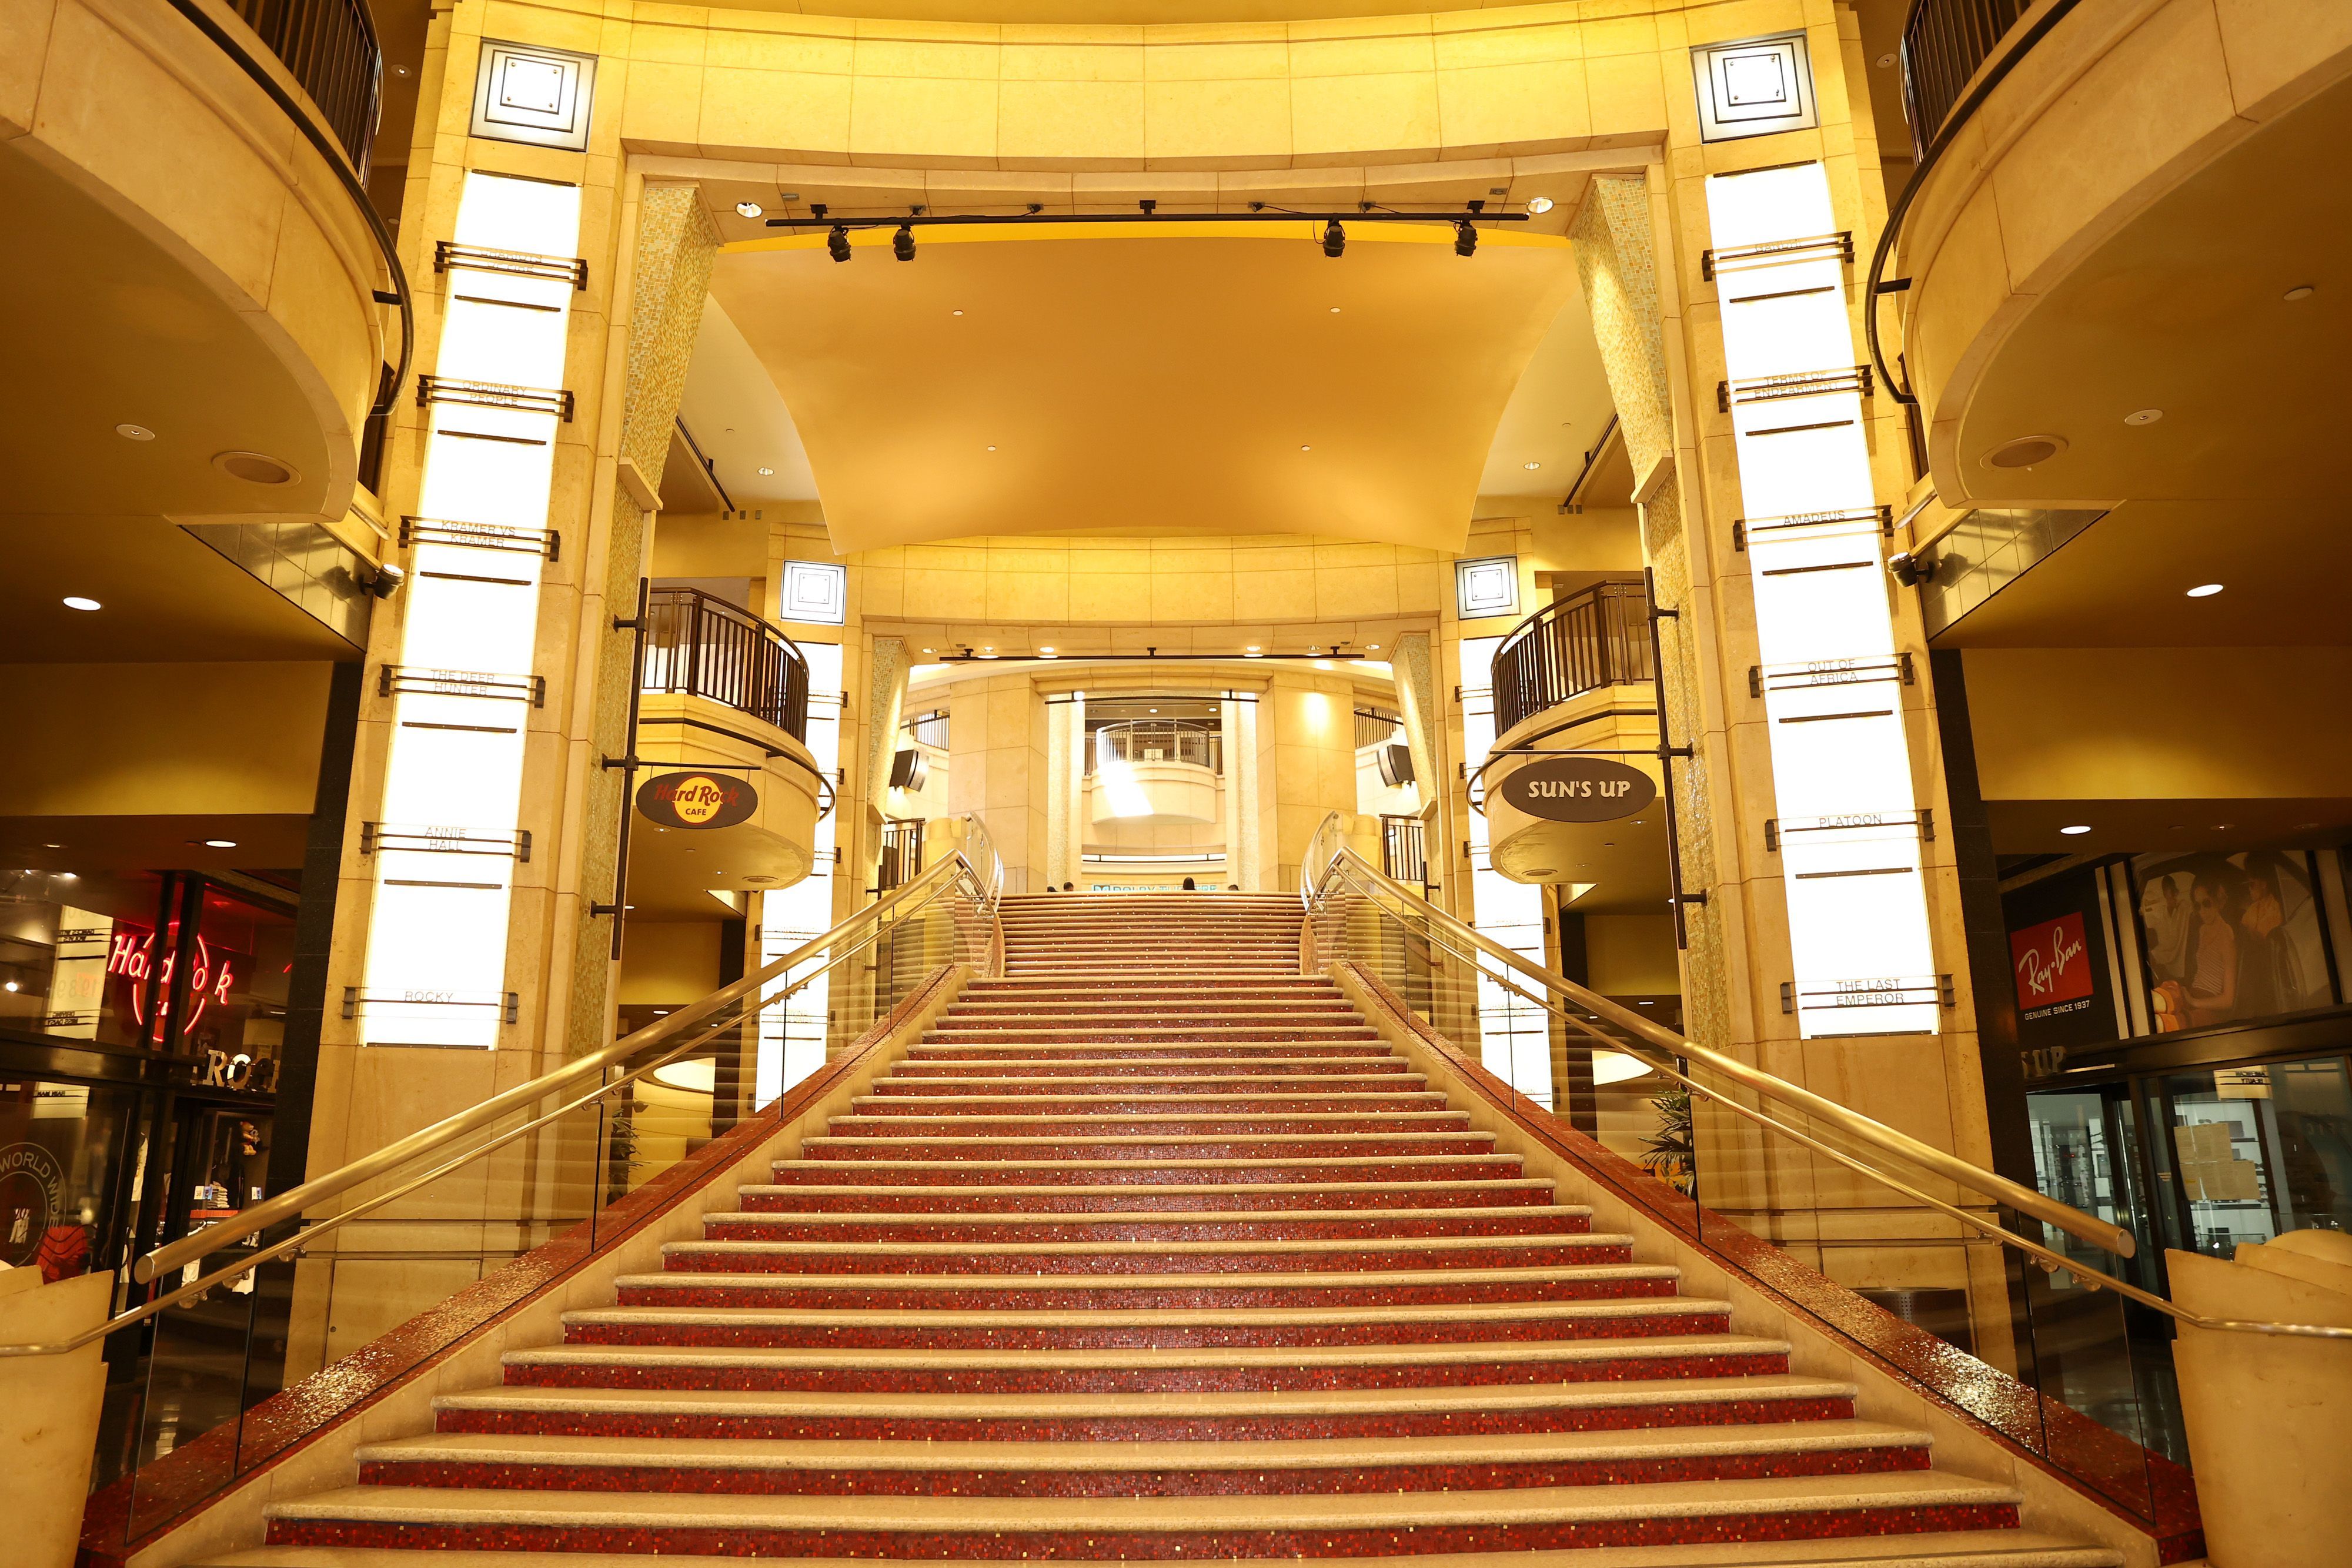 Oscar nominees walk these stairs to the Dolby Theatre